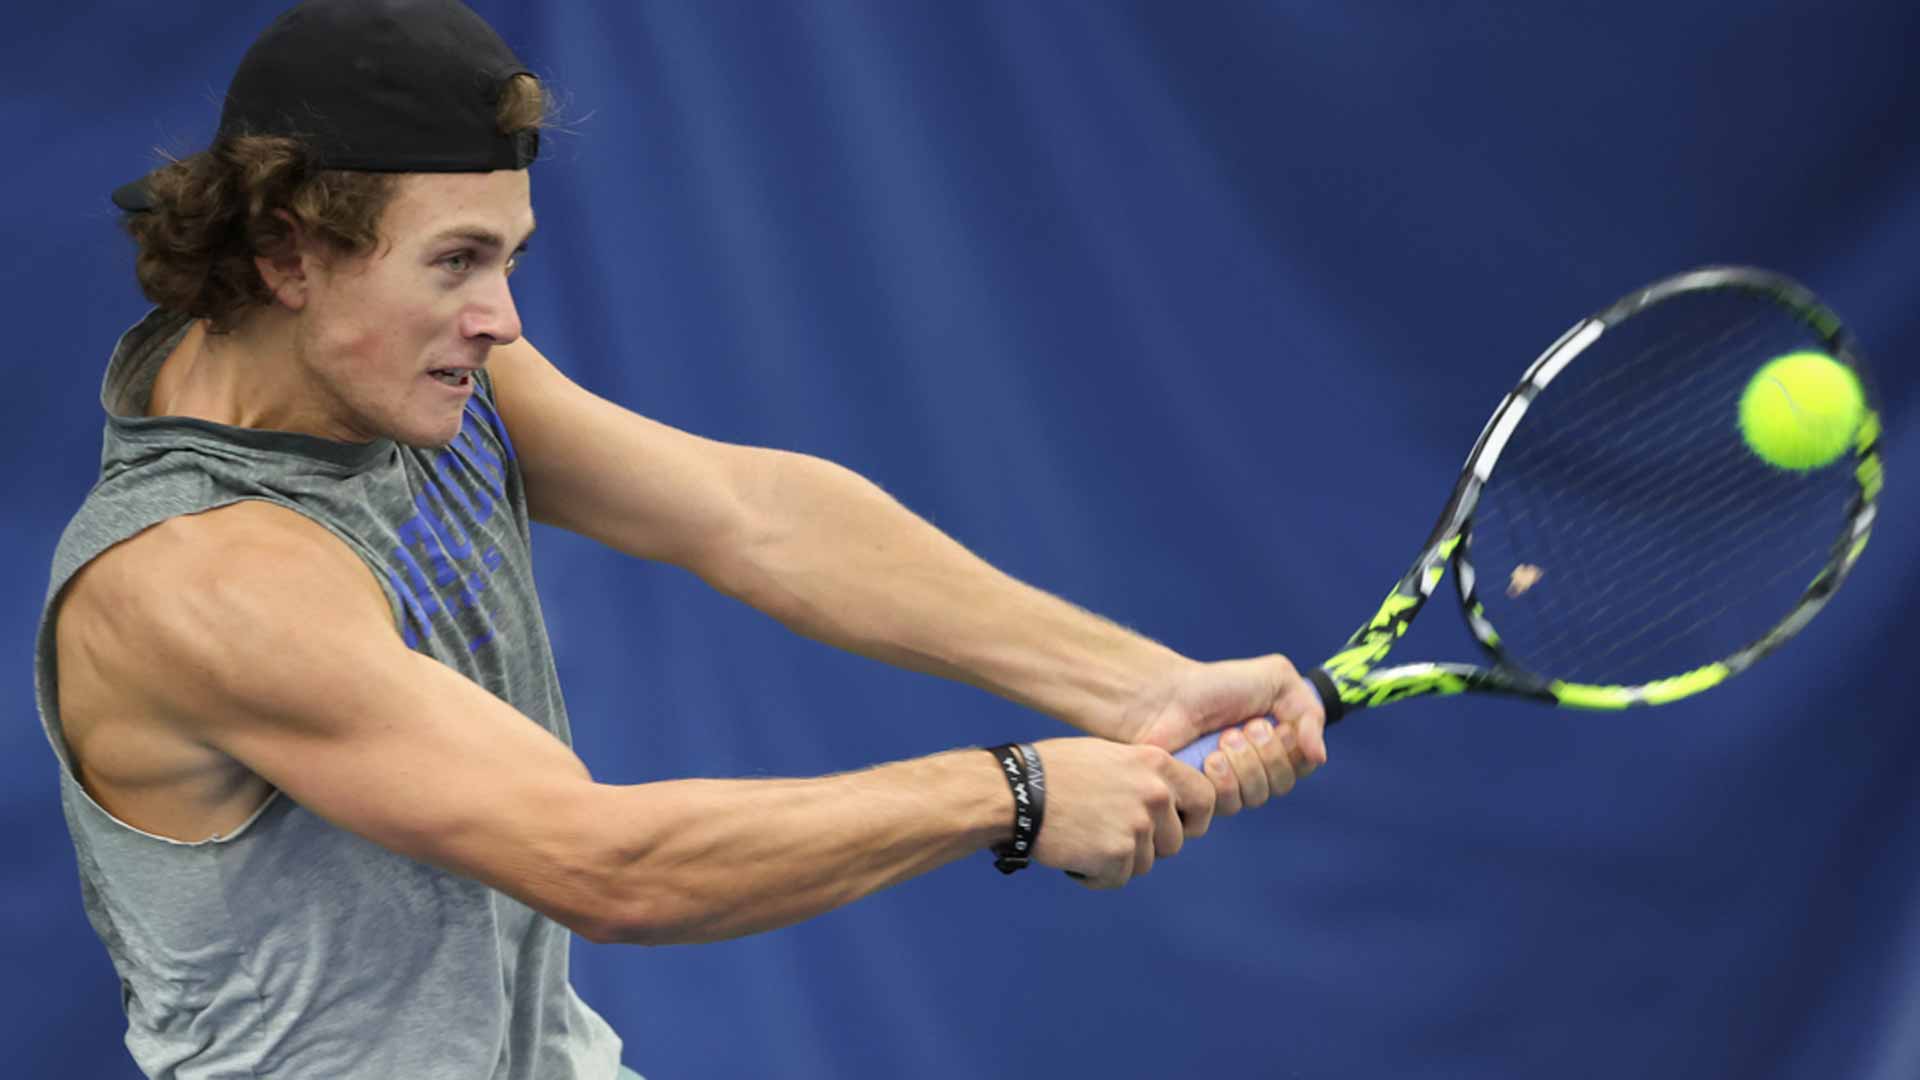 Liam Draxl is competing this week at the Calgary National Bank Challenger.